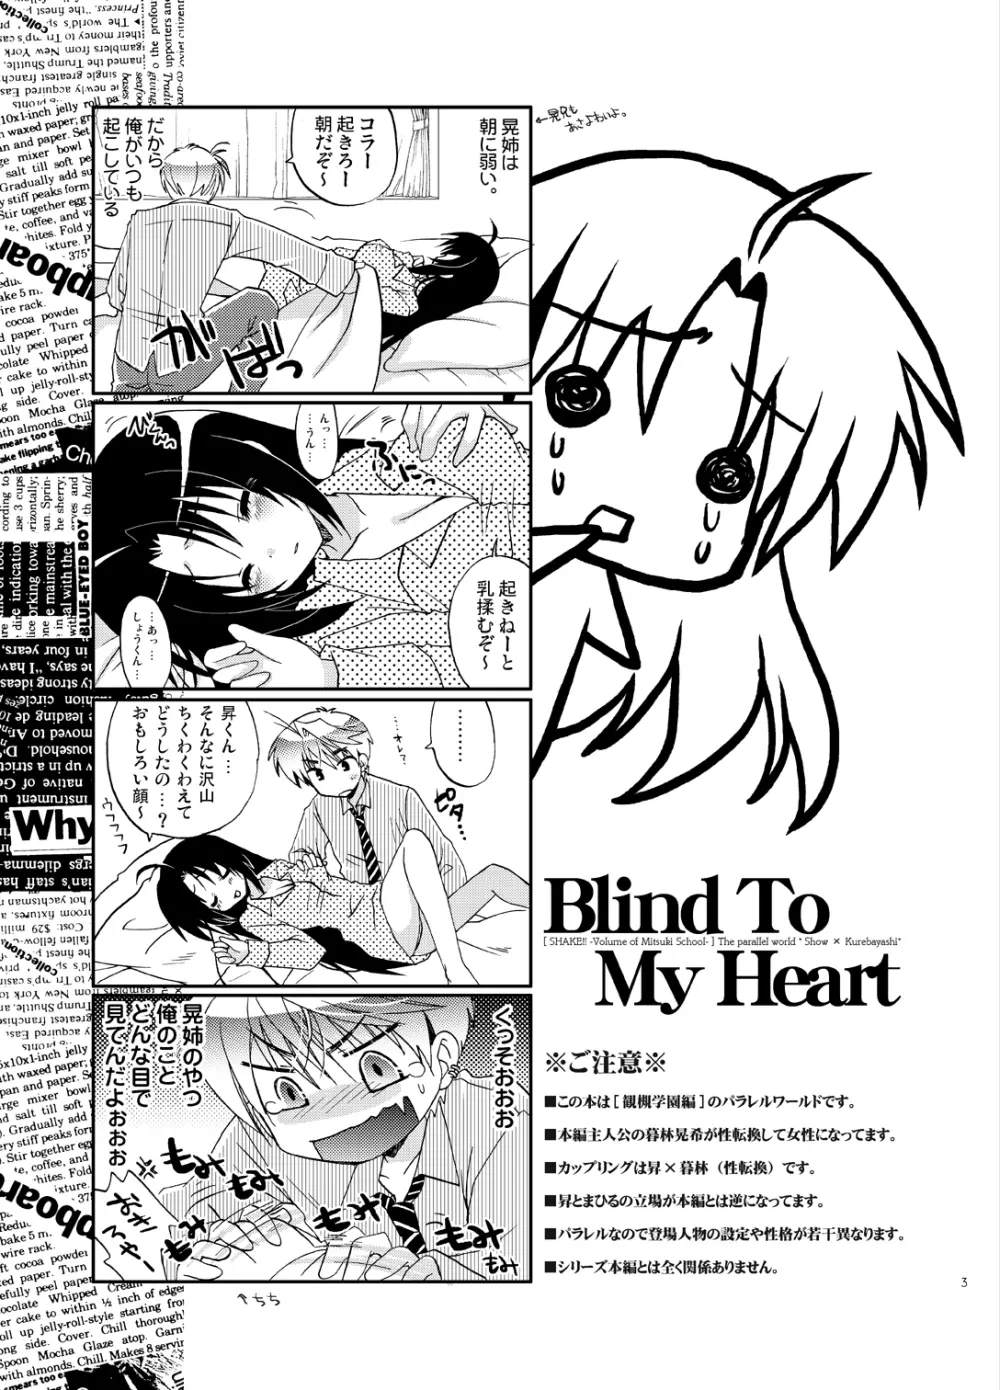 Blind To My Heart 2ページ